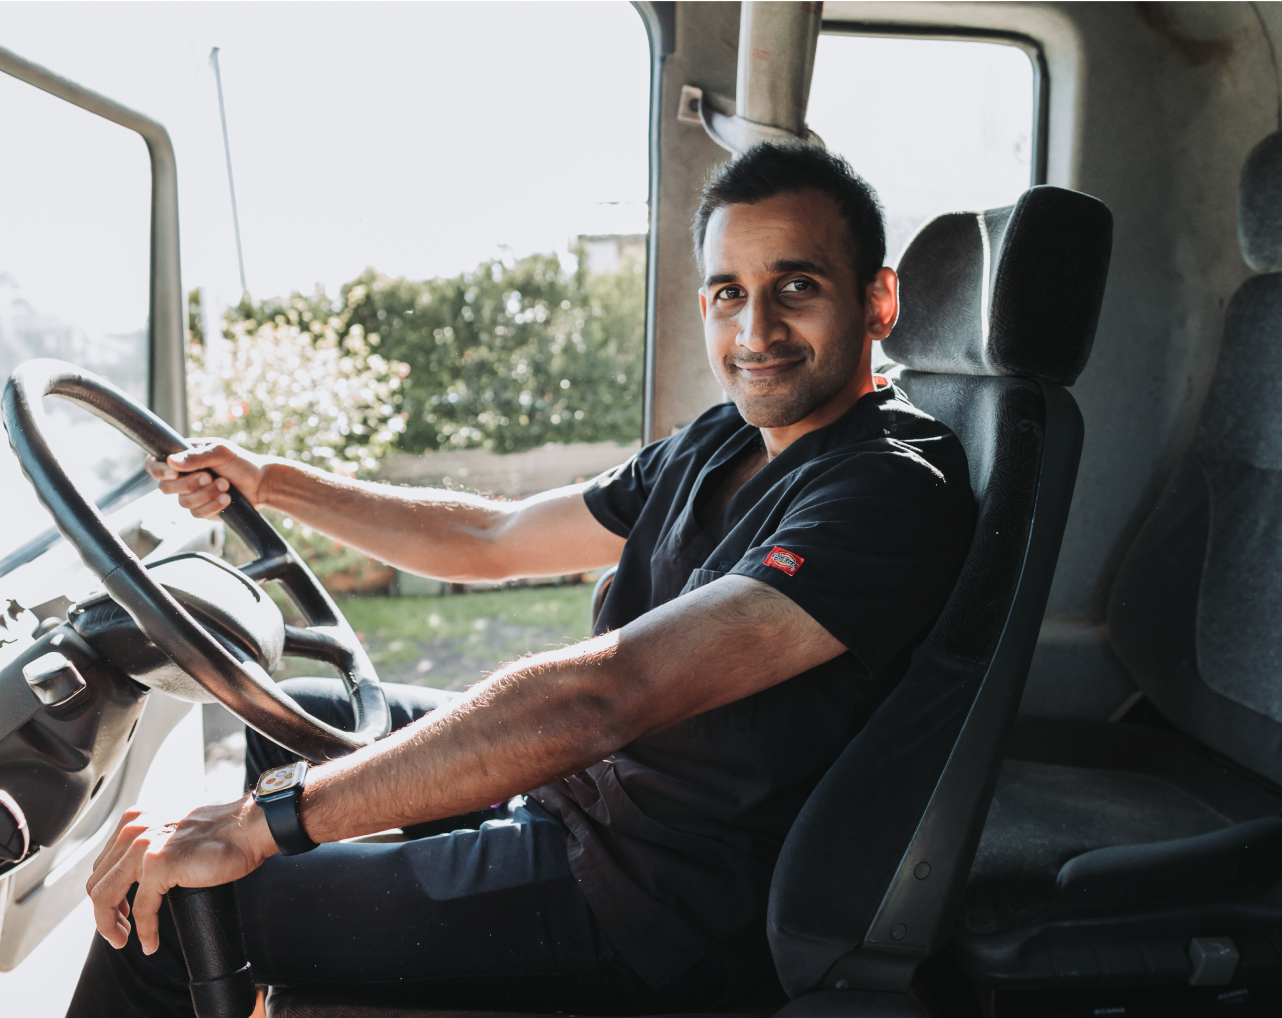 Dr Jalal Khan has been operating his own Dental Truck across New South Wales, Australia since 2017